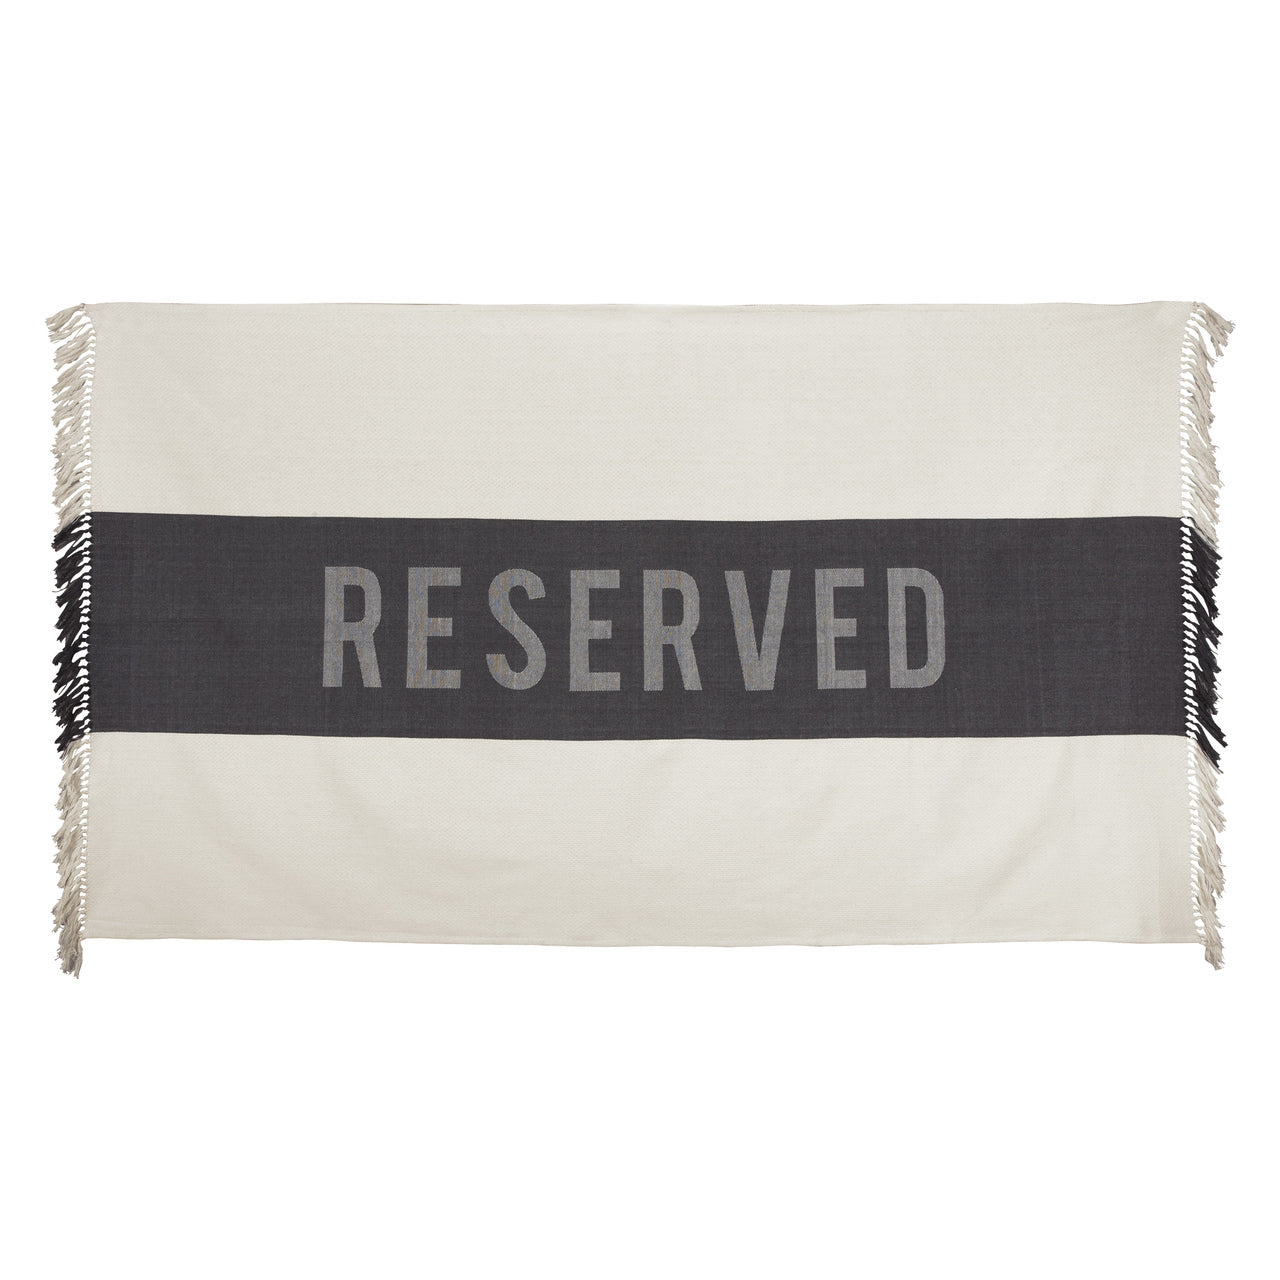 Beach Towels Oversized I Cotton Beach Towel — "Reserved"